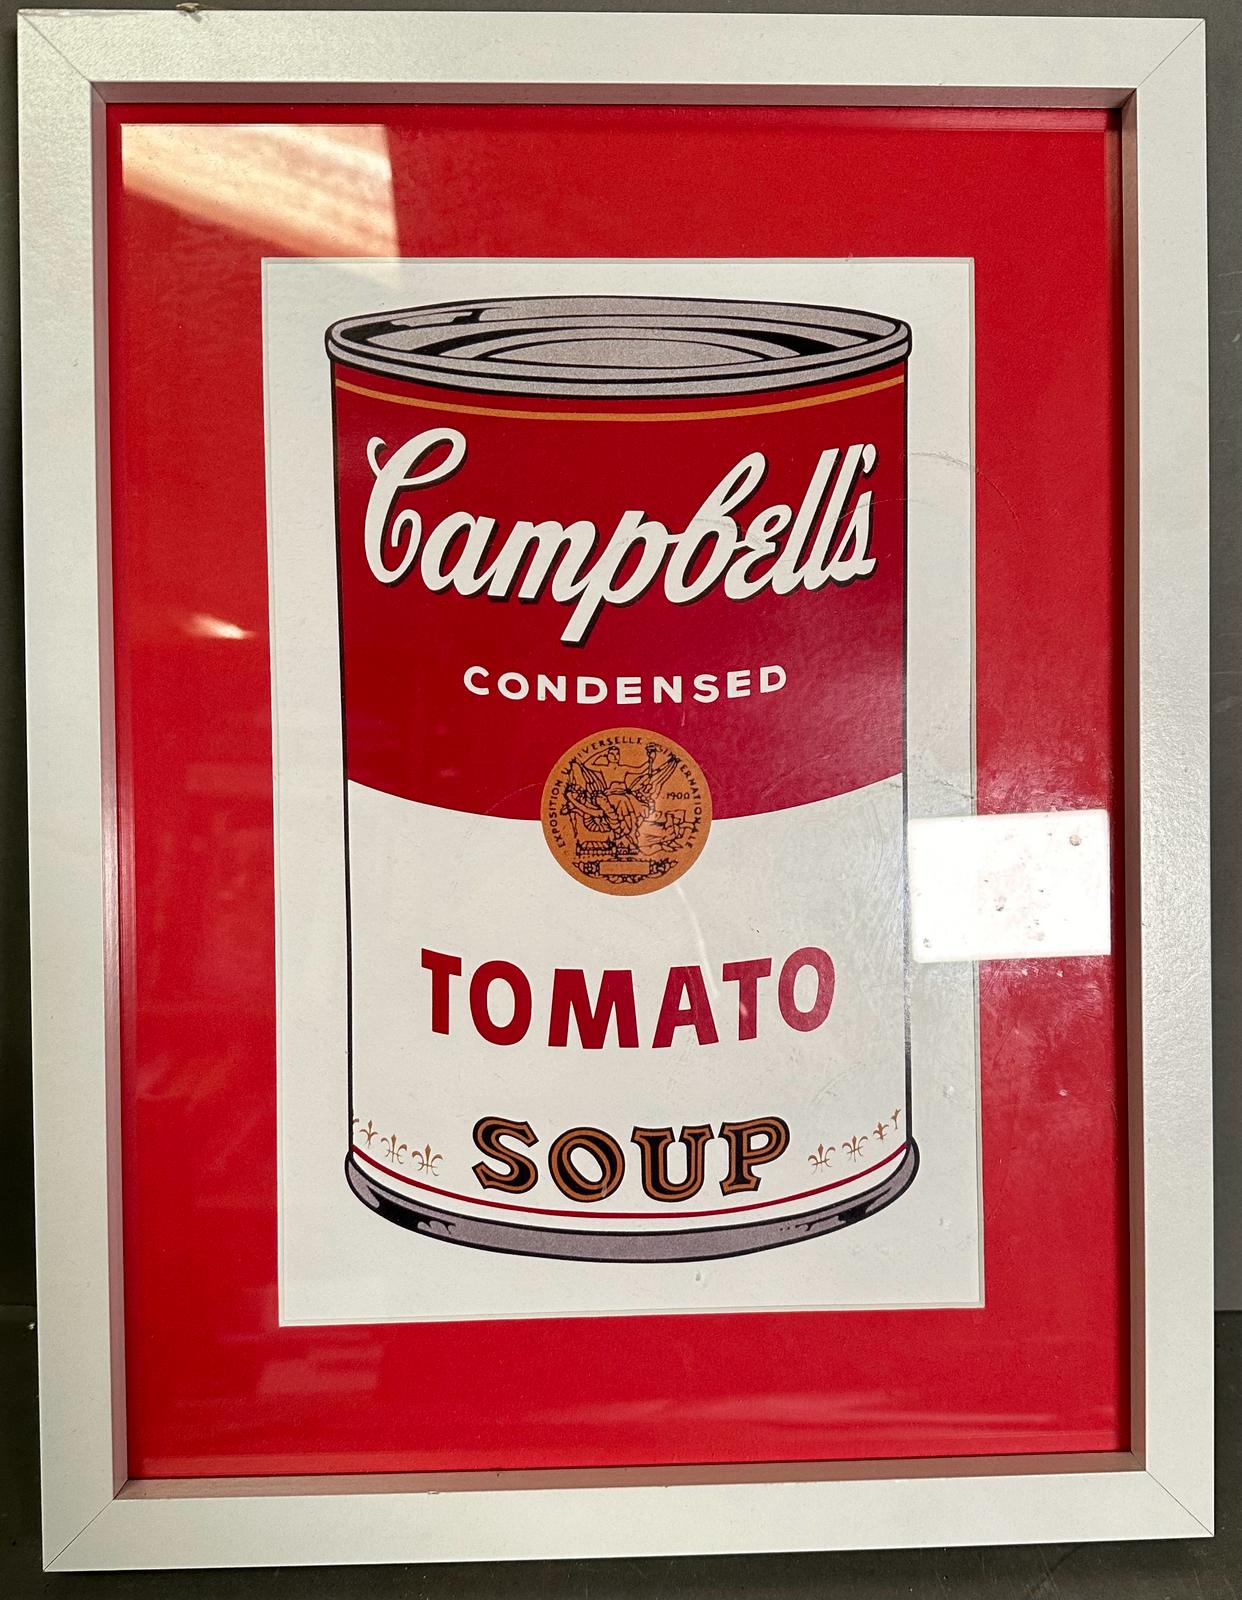 A set of four Andy Warhol Foundation Campbells tomato soup cans, limited edition and a framed - Image 5 of 6